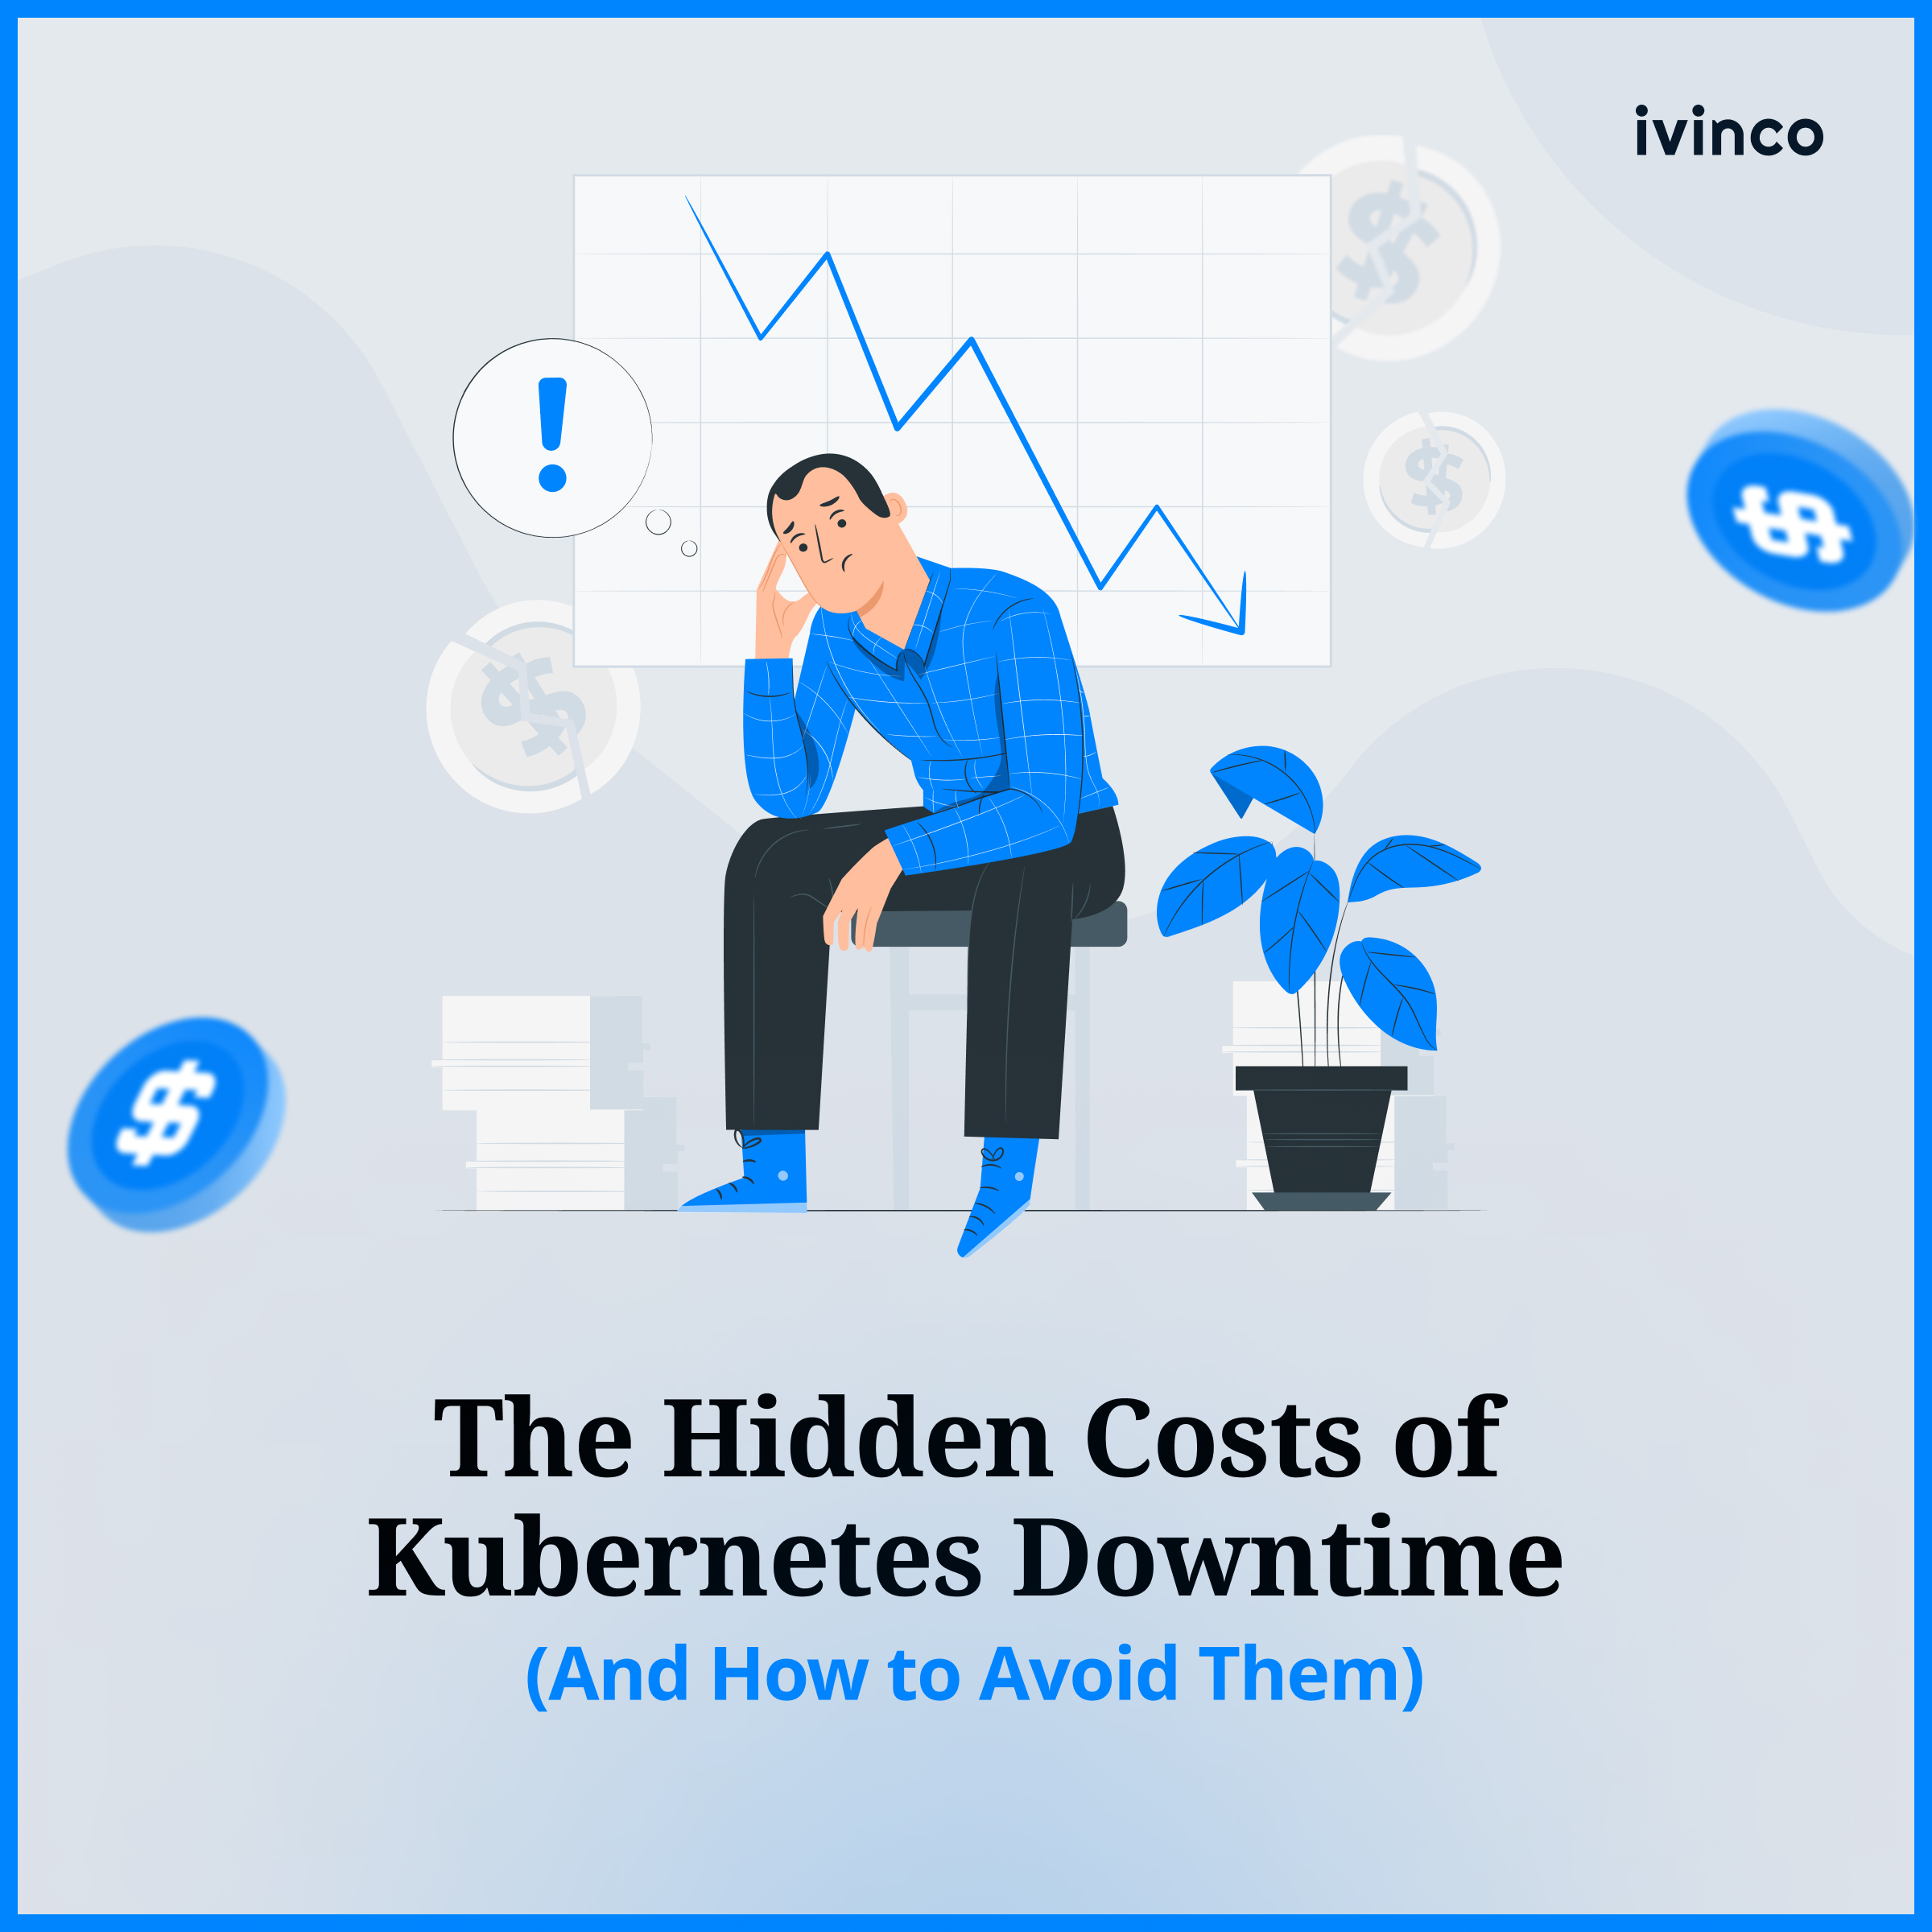 The Hidden Costs of Kubernetes Downtime (And How to Avoid Them)
